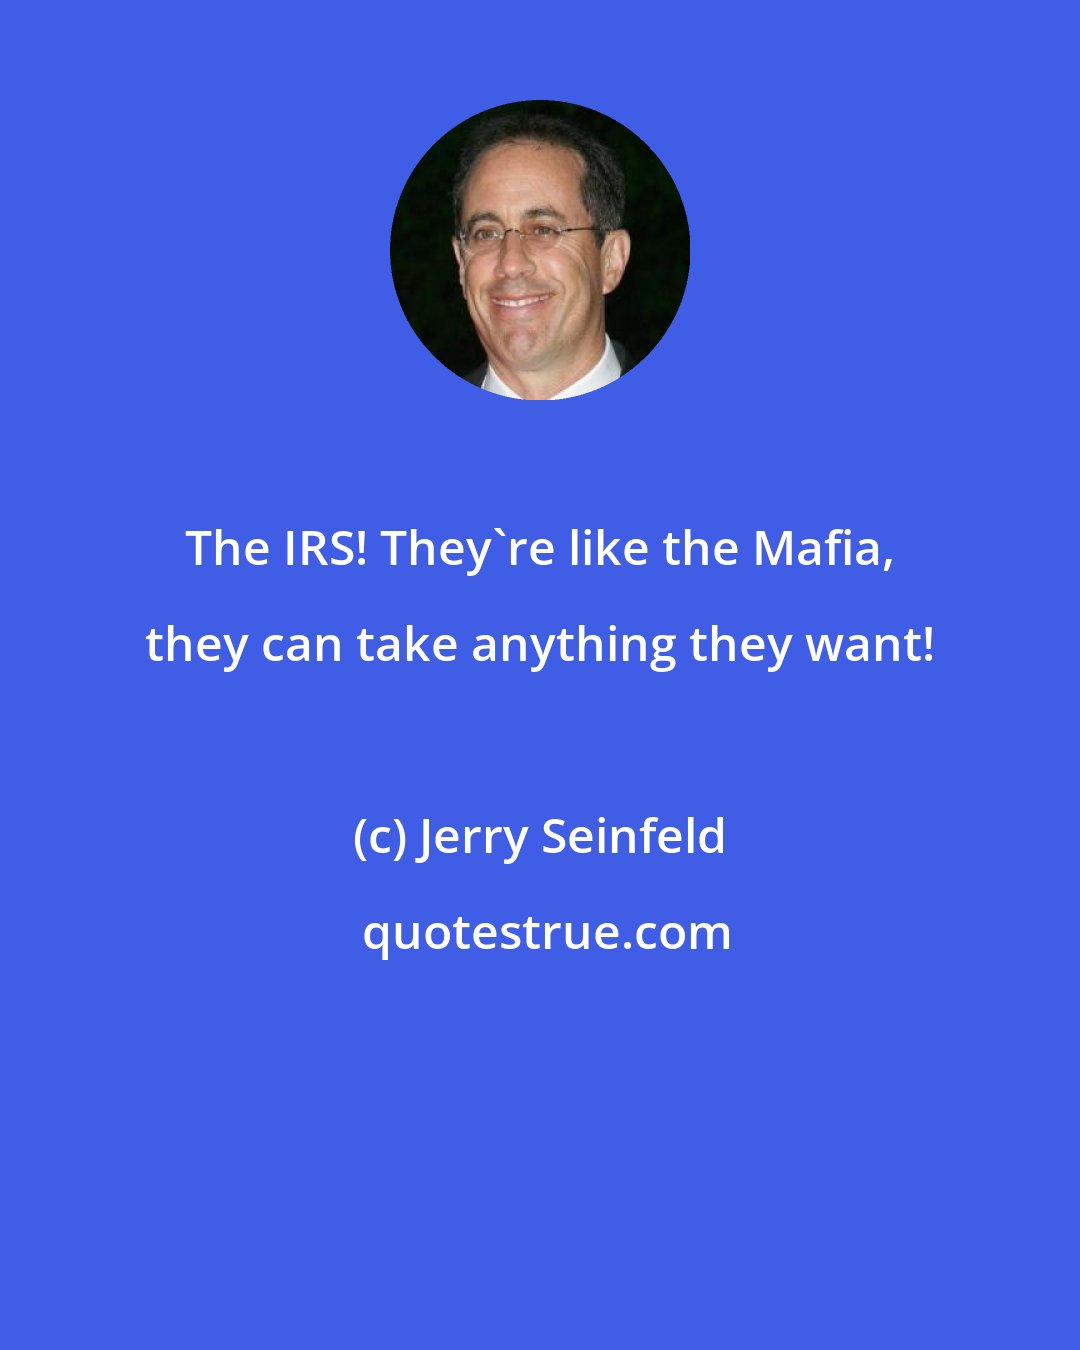 Jerry Seinfeld: The IRS! They're like the Mafia, they can take anything they want!